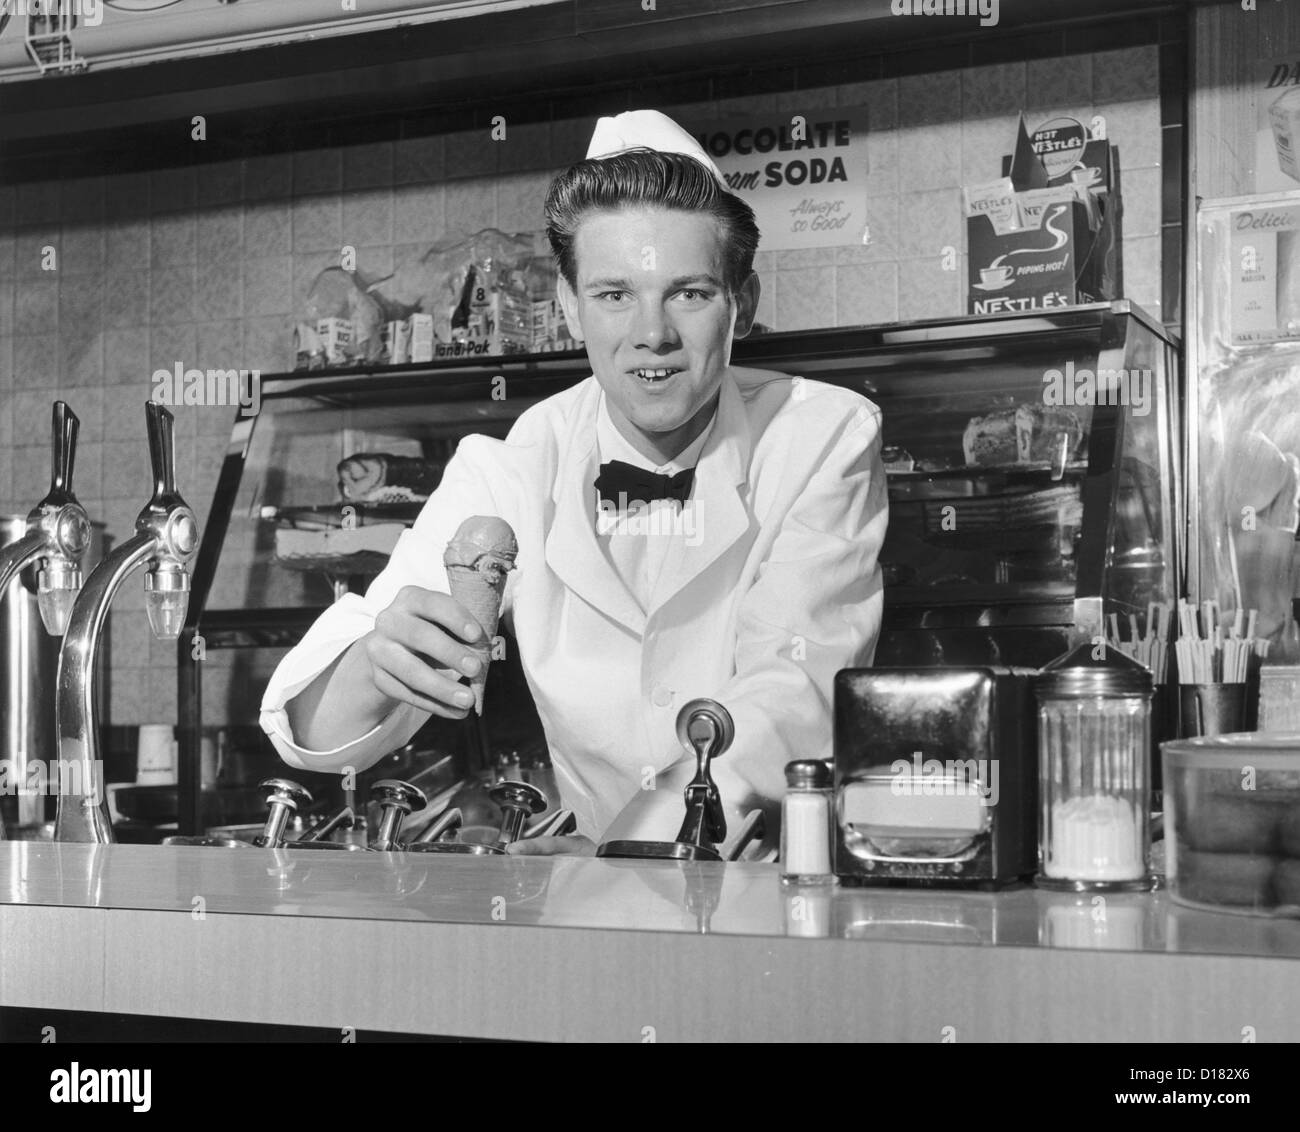 Soda jerk holding ice cream cone, 1960 Banque D'Images